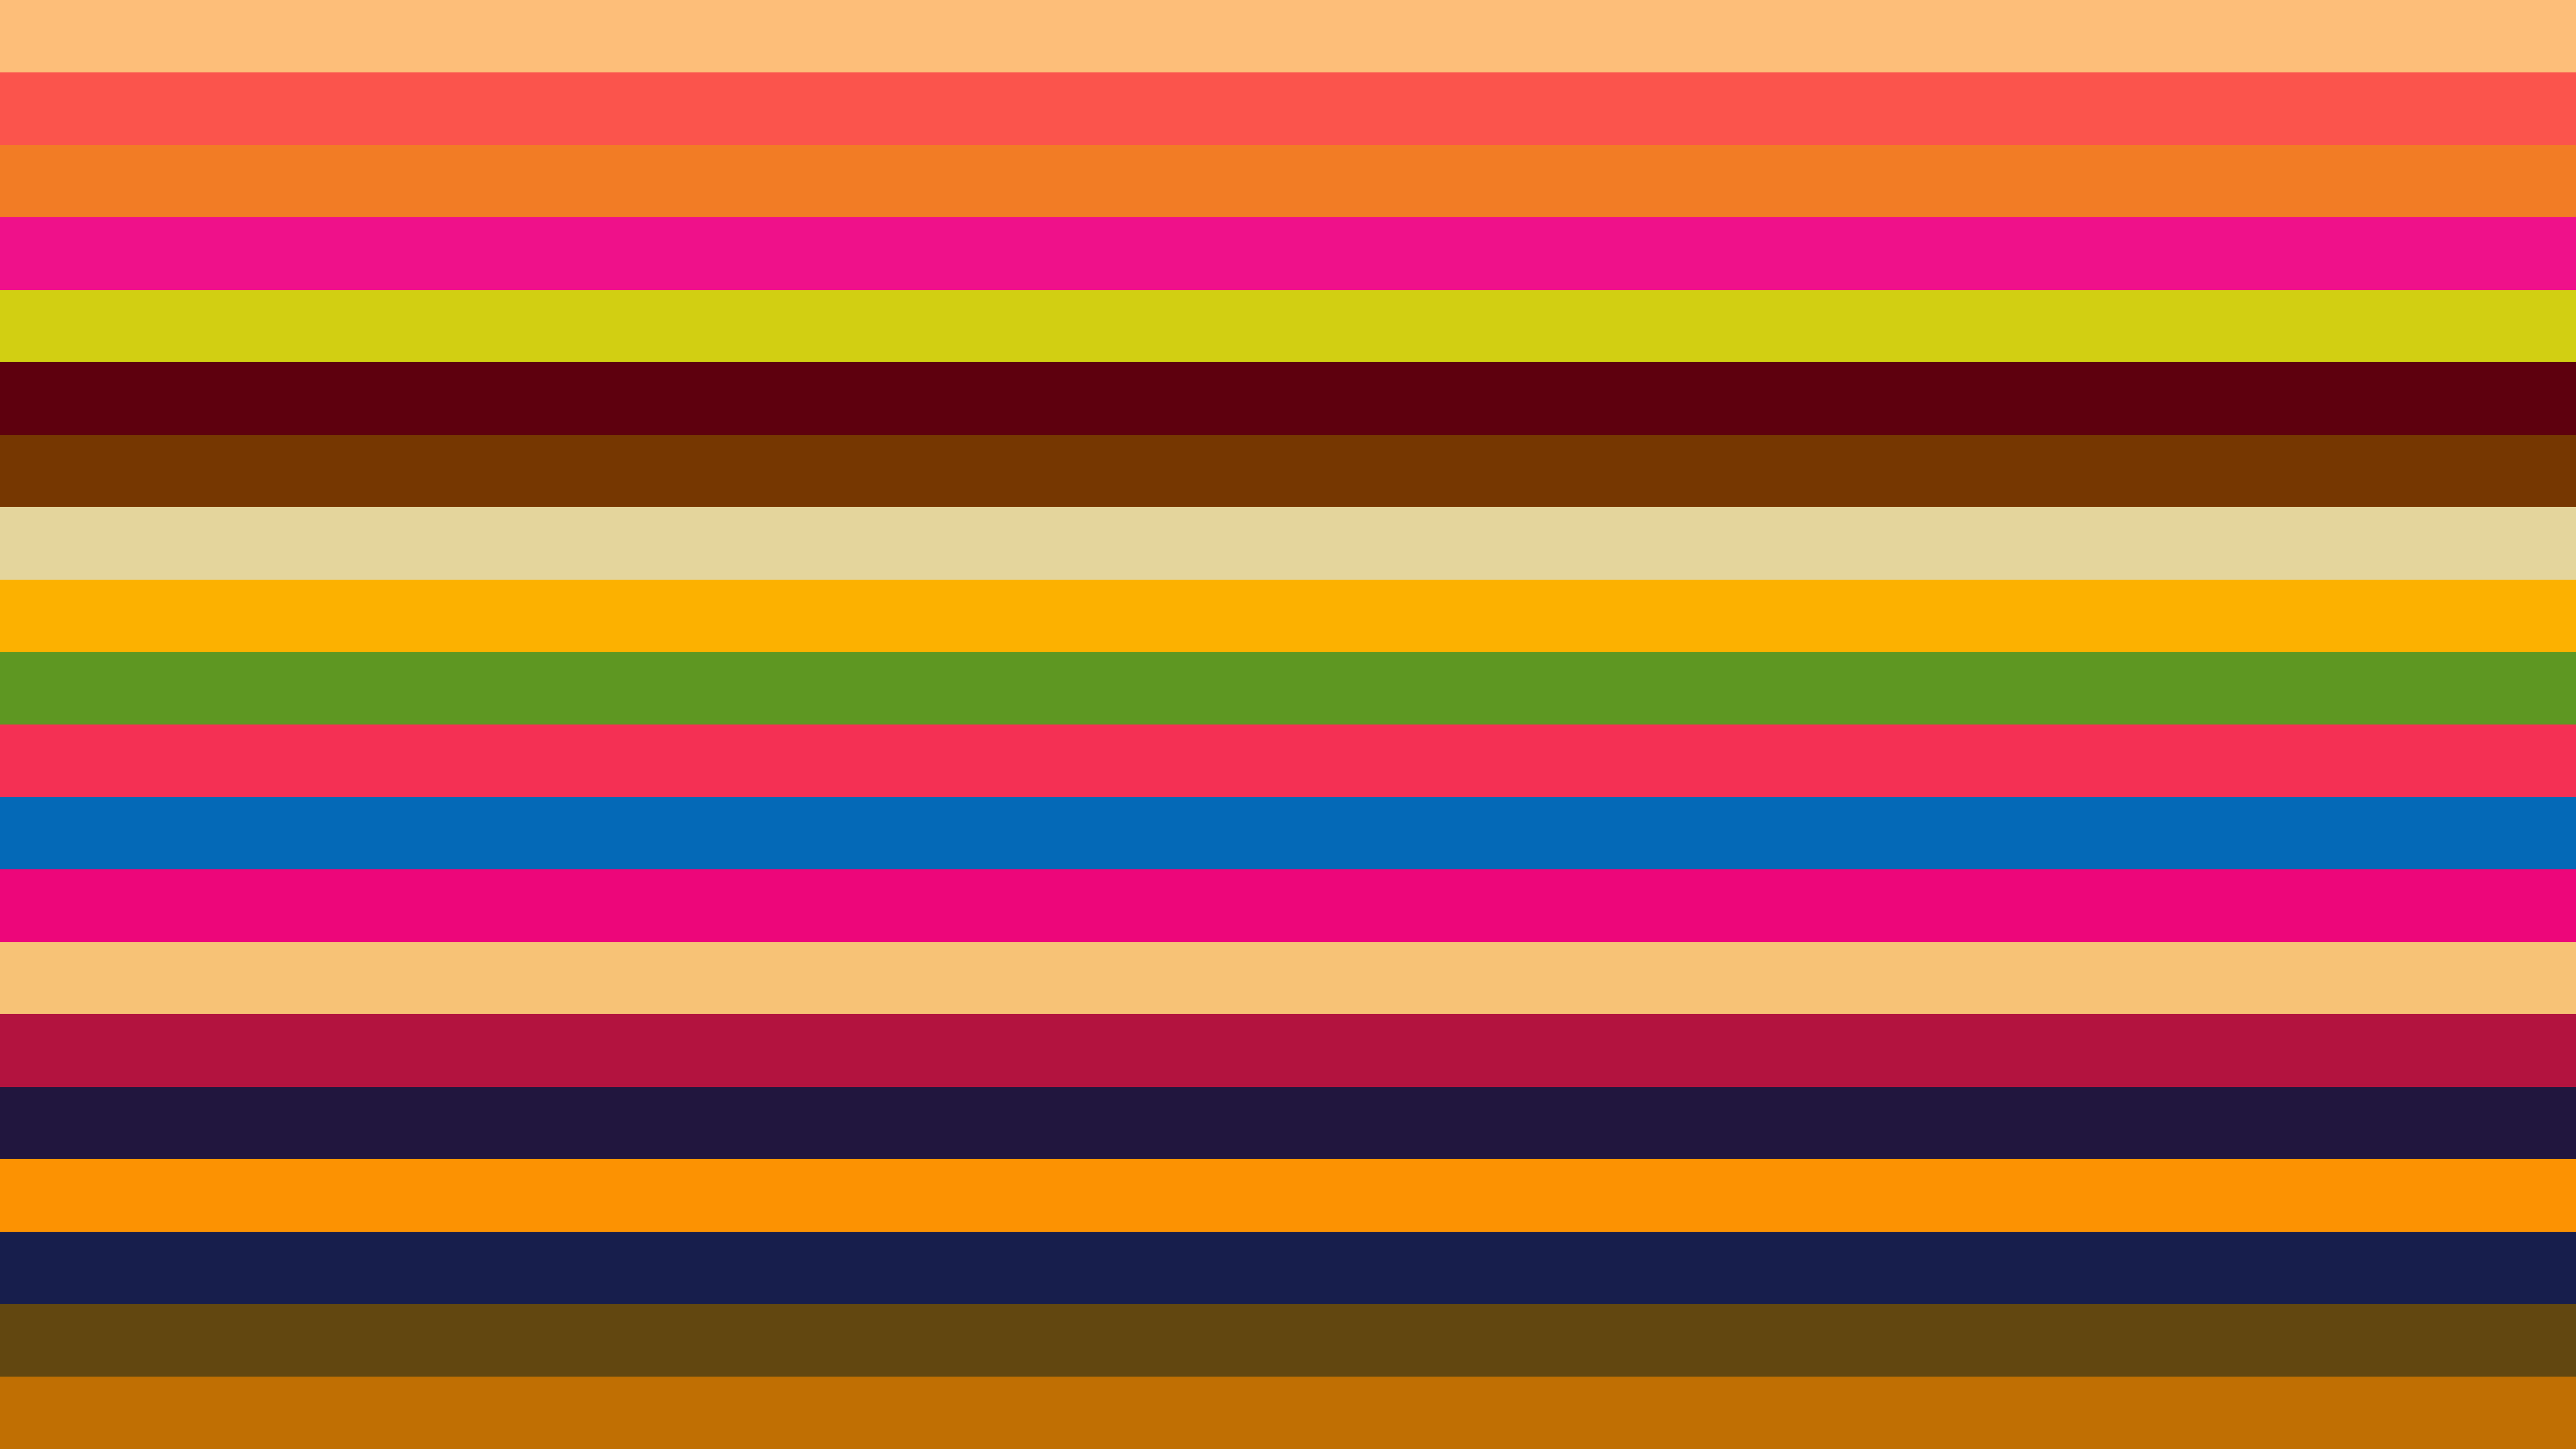 Colorful Horizontal Stripe Background Wallpaper Image For Free Download -  Pngtree